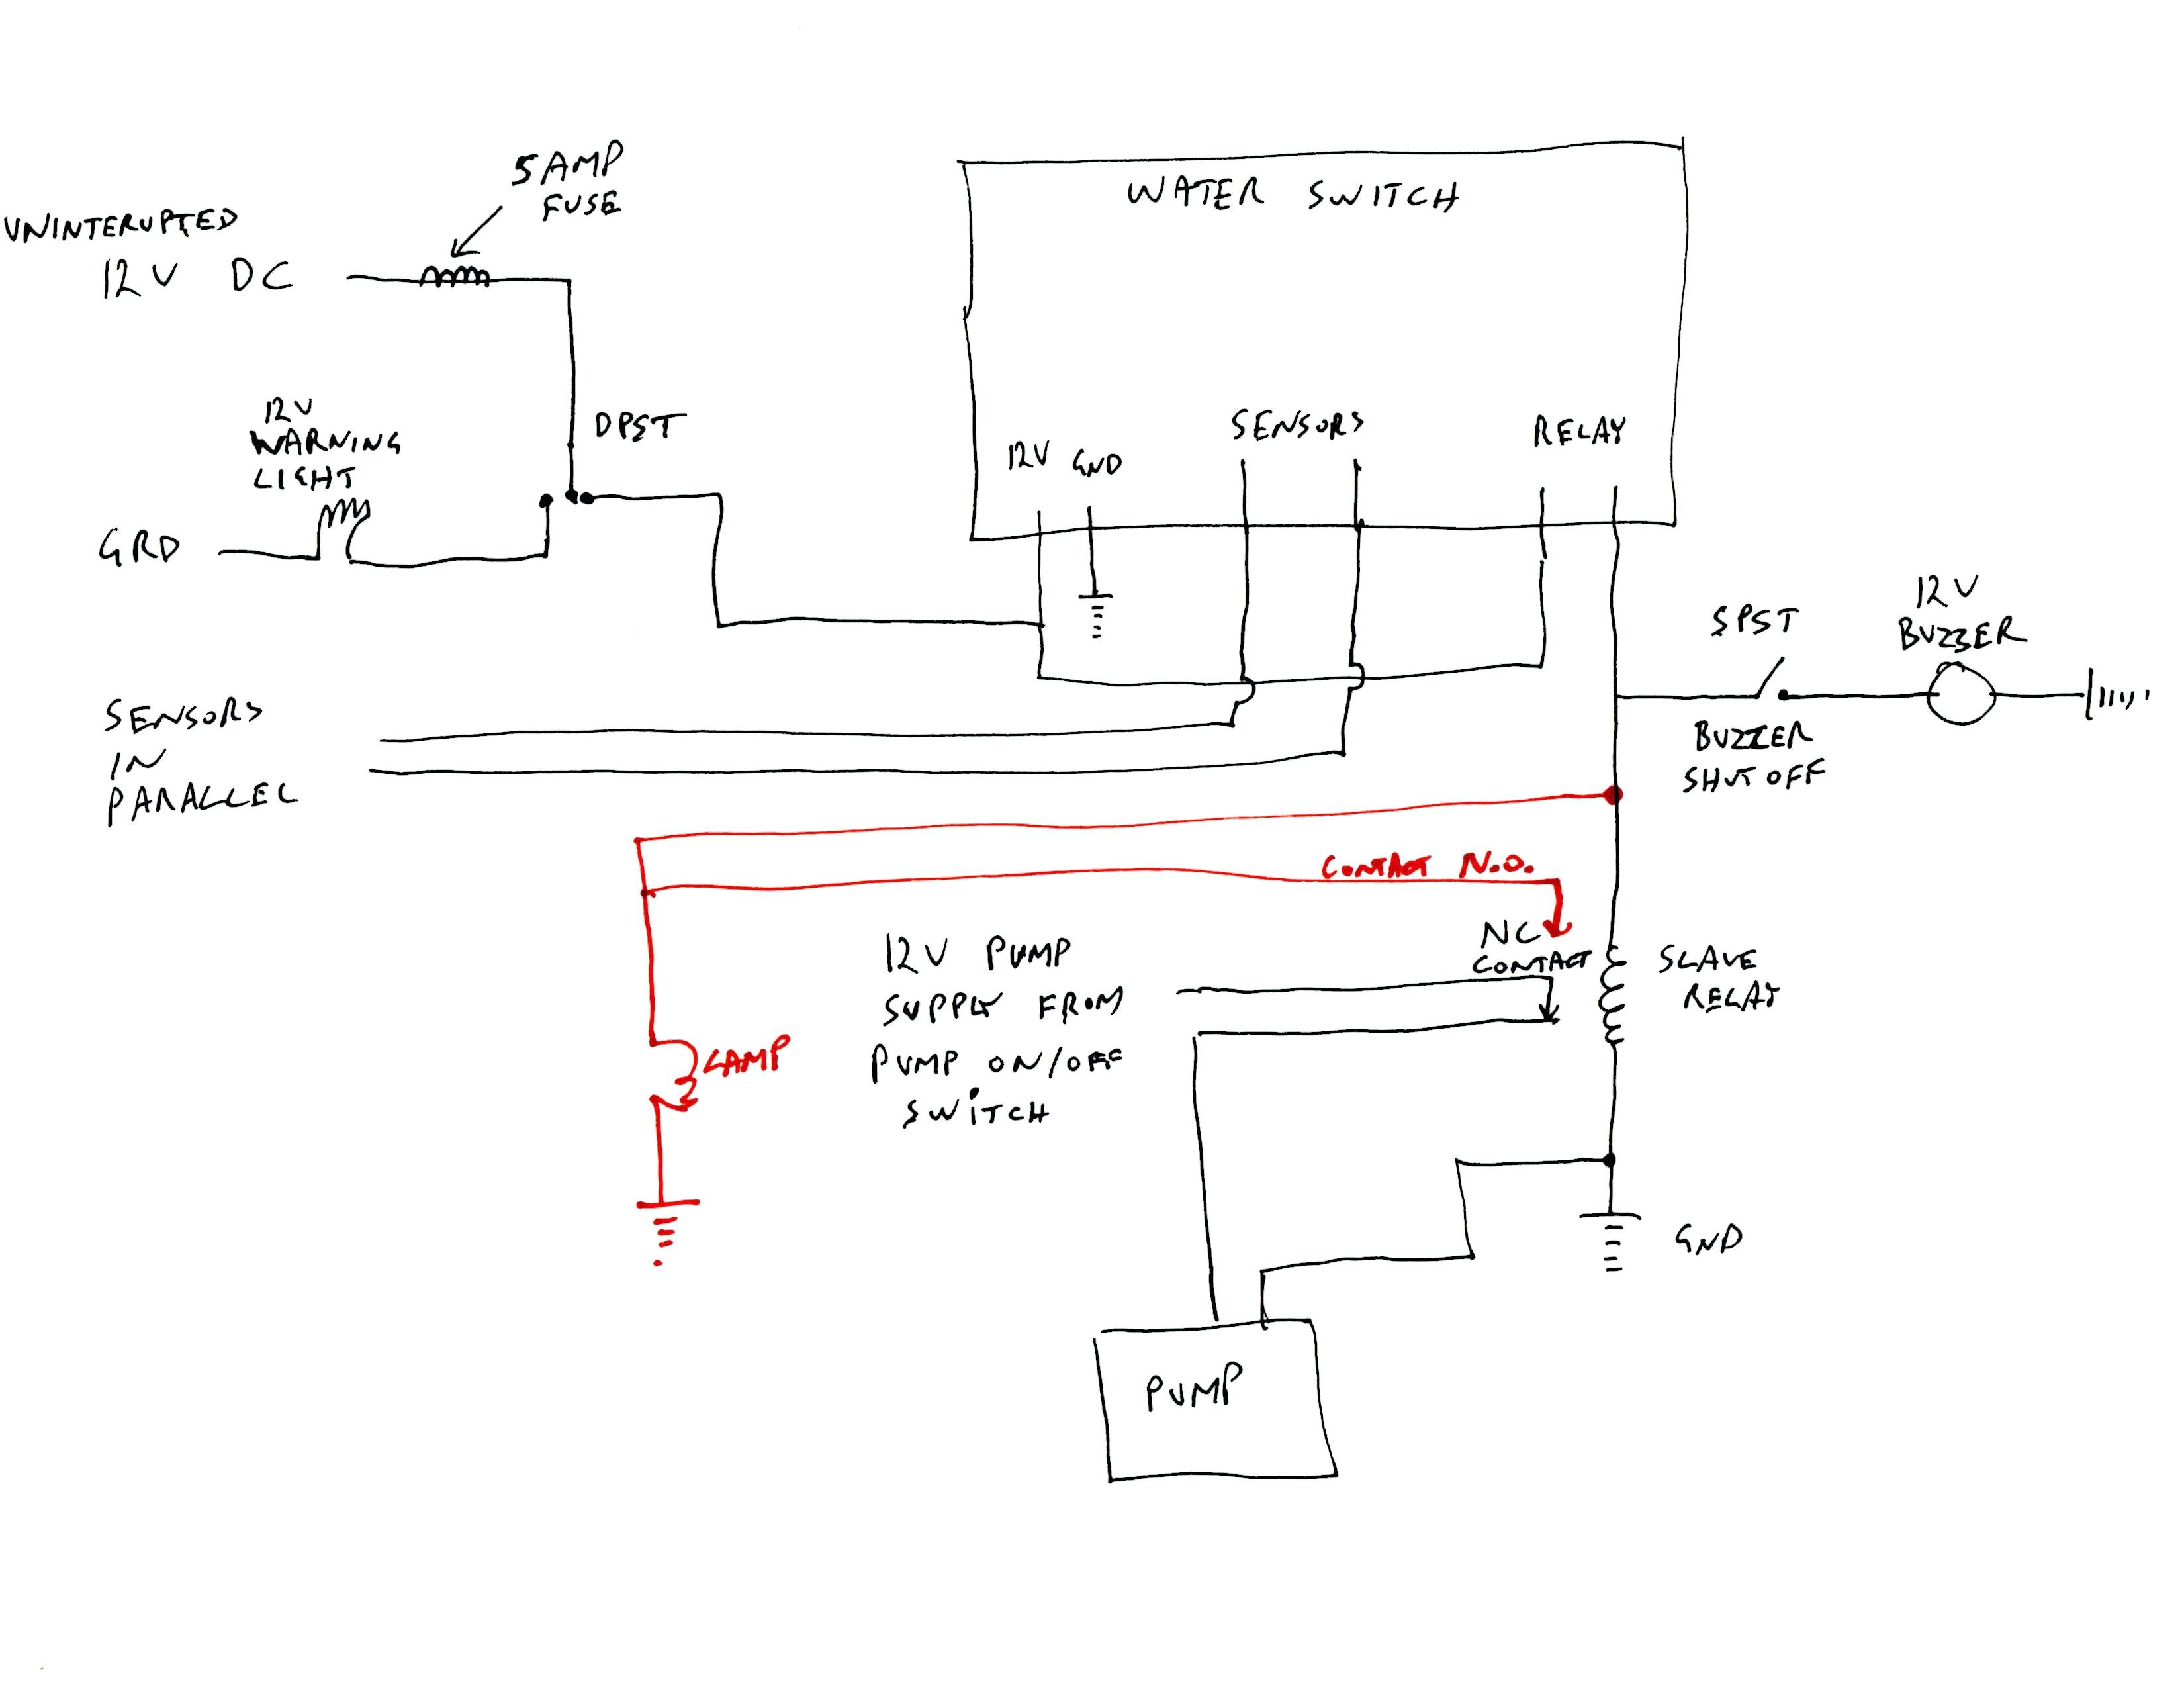 Full Size of Wiring Diagram Jayco Travel Trailer Dry Contact Automation ponents For A Net Open